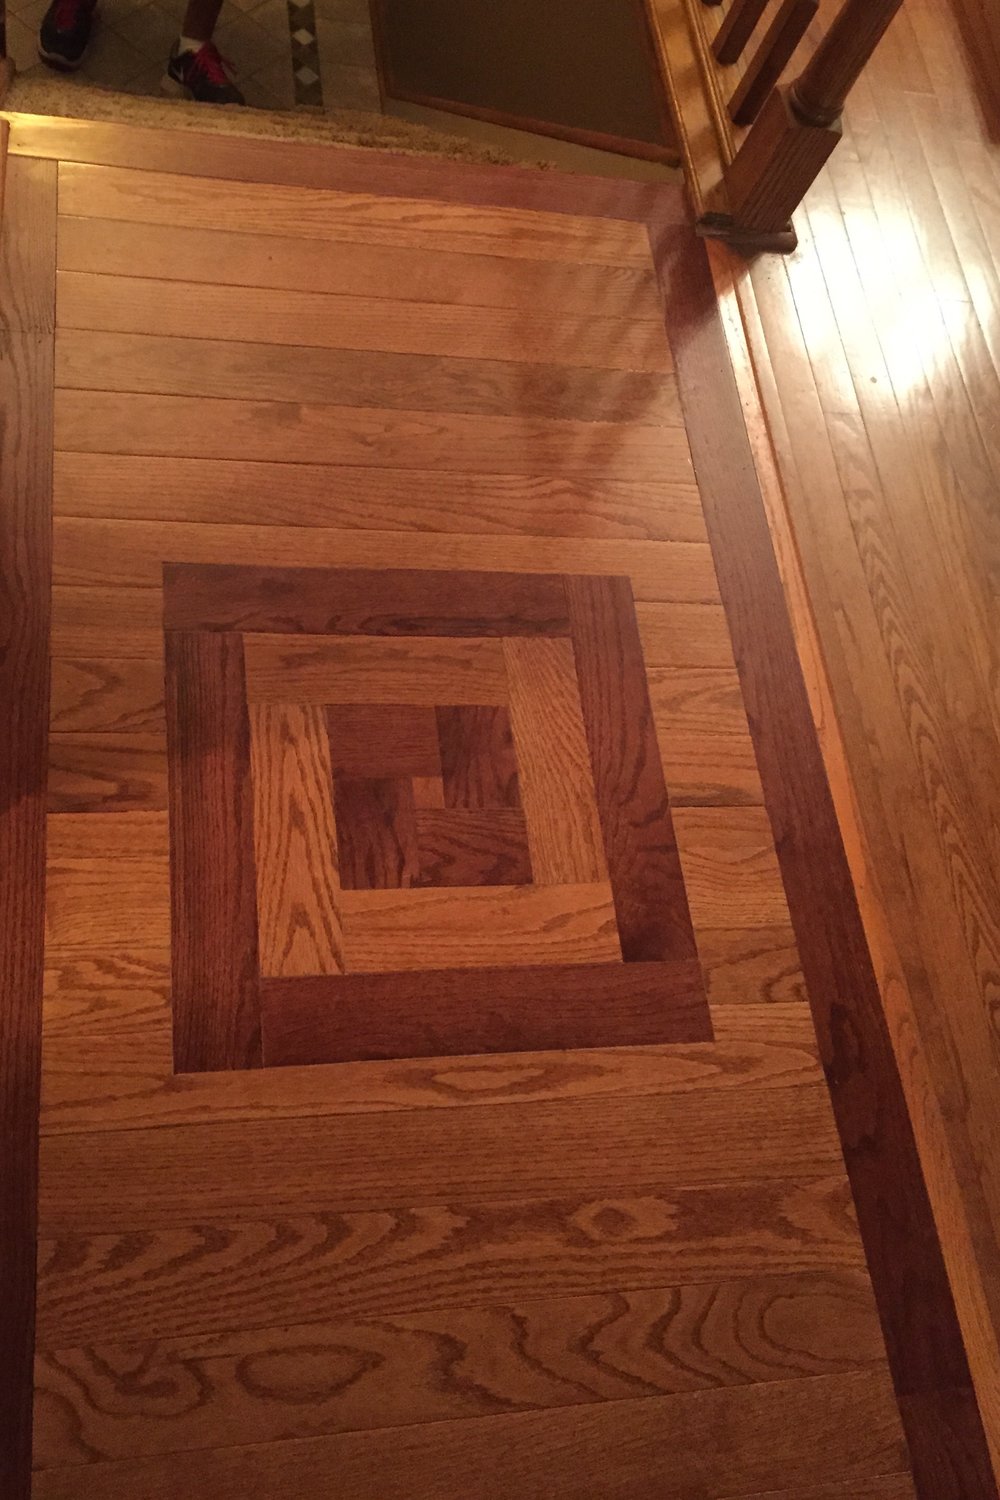 About Transition Flooring Concepts, Hardwood Floor Reducer Strips